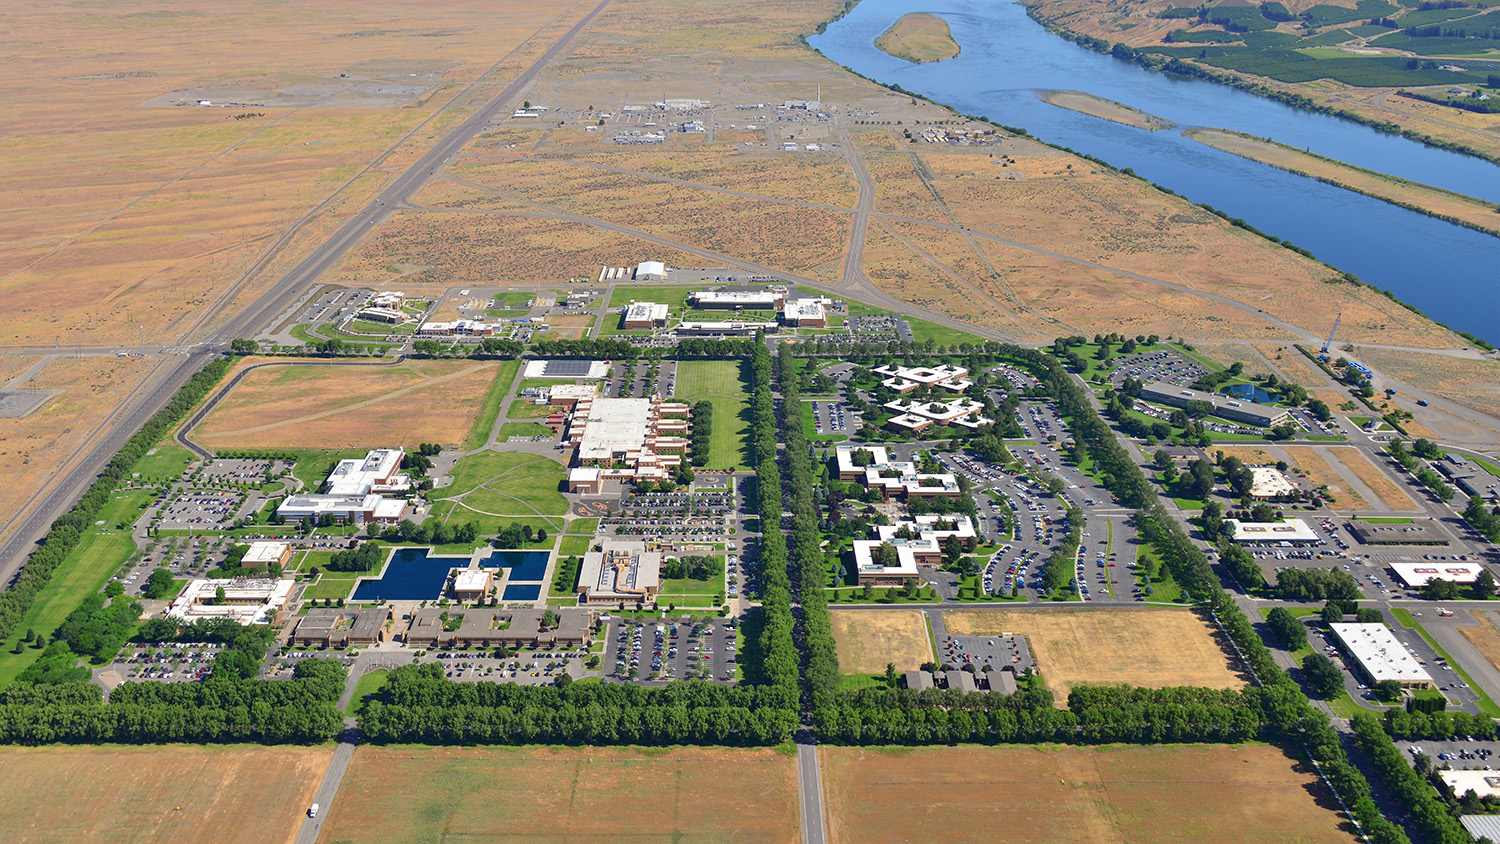 An aerial view of the Richland Campus at the Pacific Northwest National Laboratory.